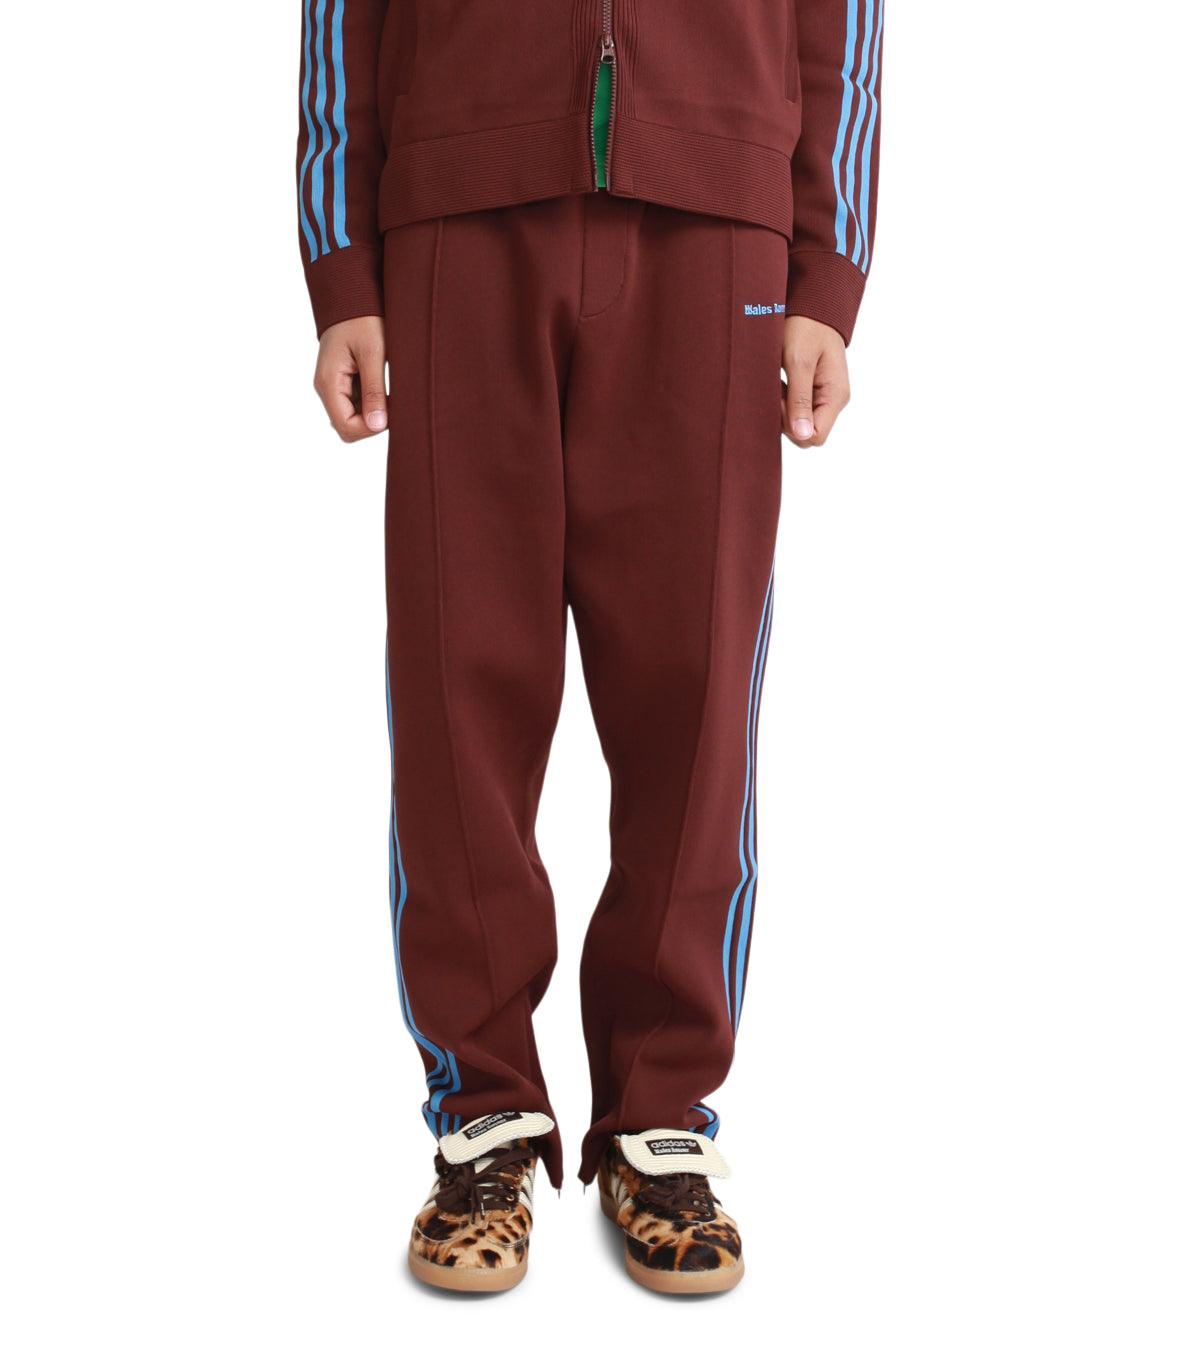 Adidas x Wales Bonner Knit Trackpant Brown | SOMEWHERE